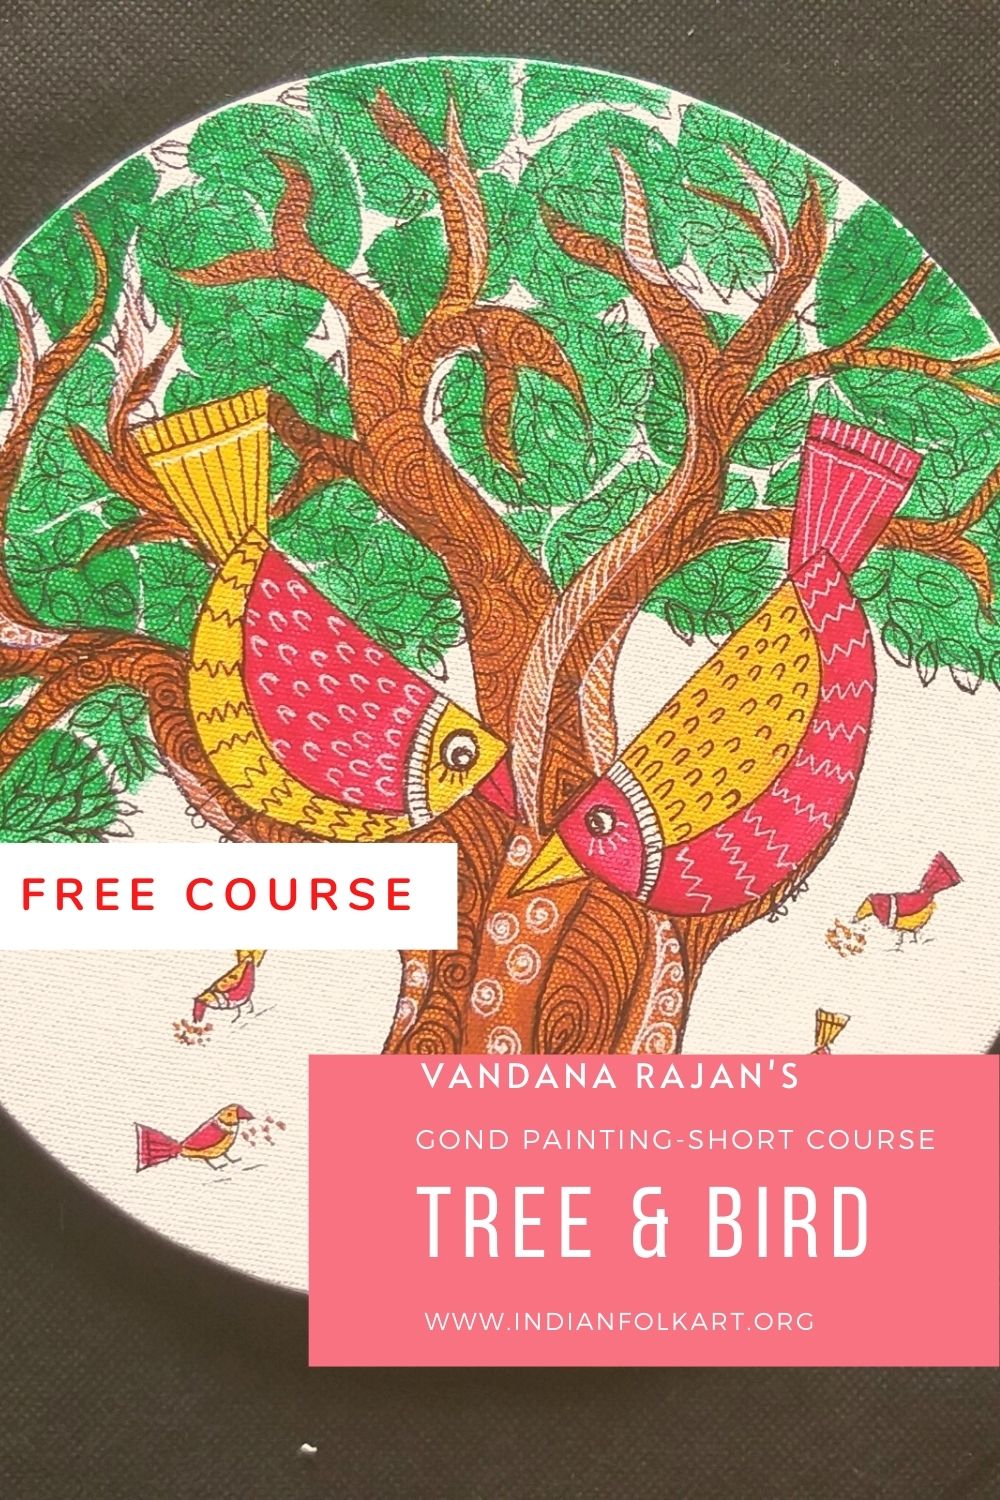 VR06 – Gond Painting Short Course, Tree and Bird